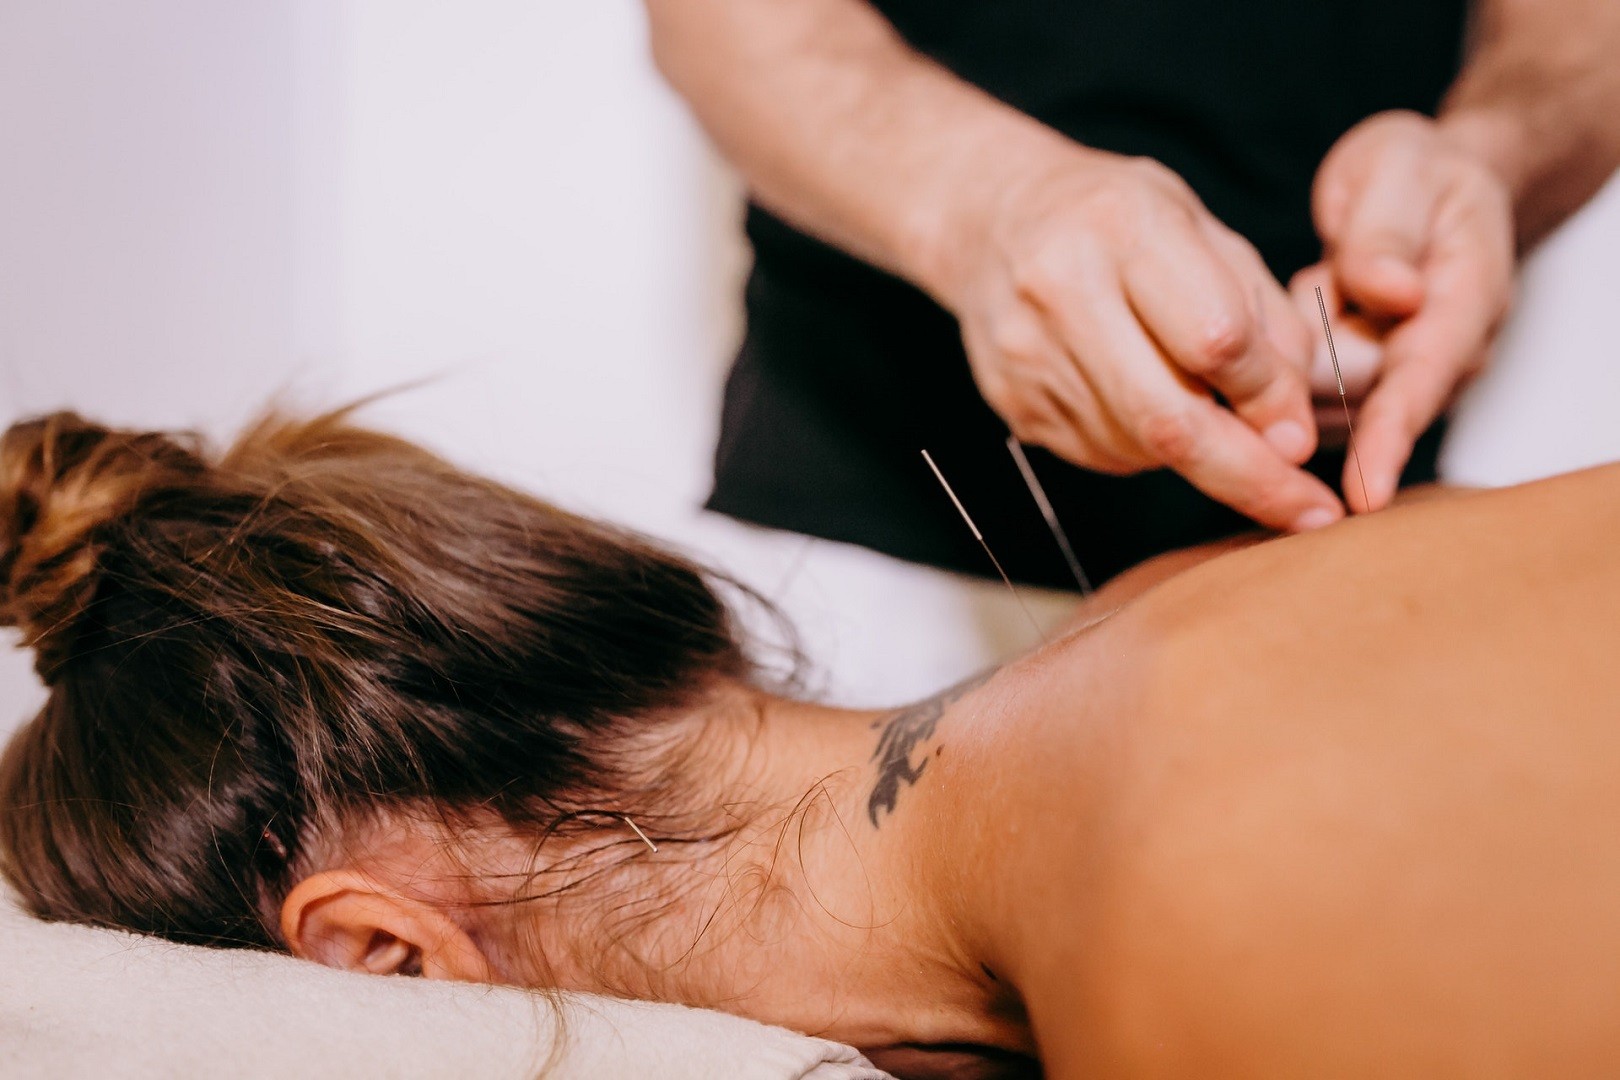 How to Become the Go-to Acupuncturist in Your Area